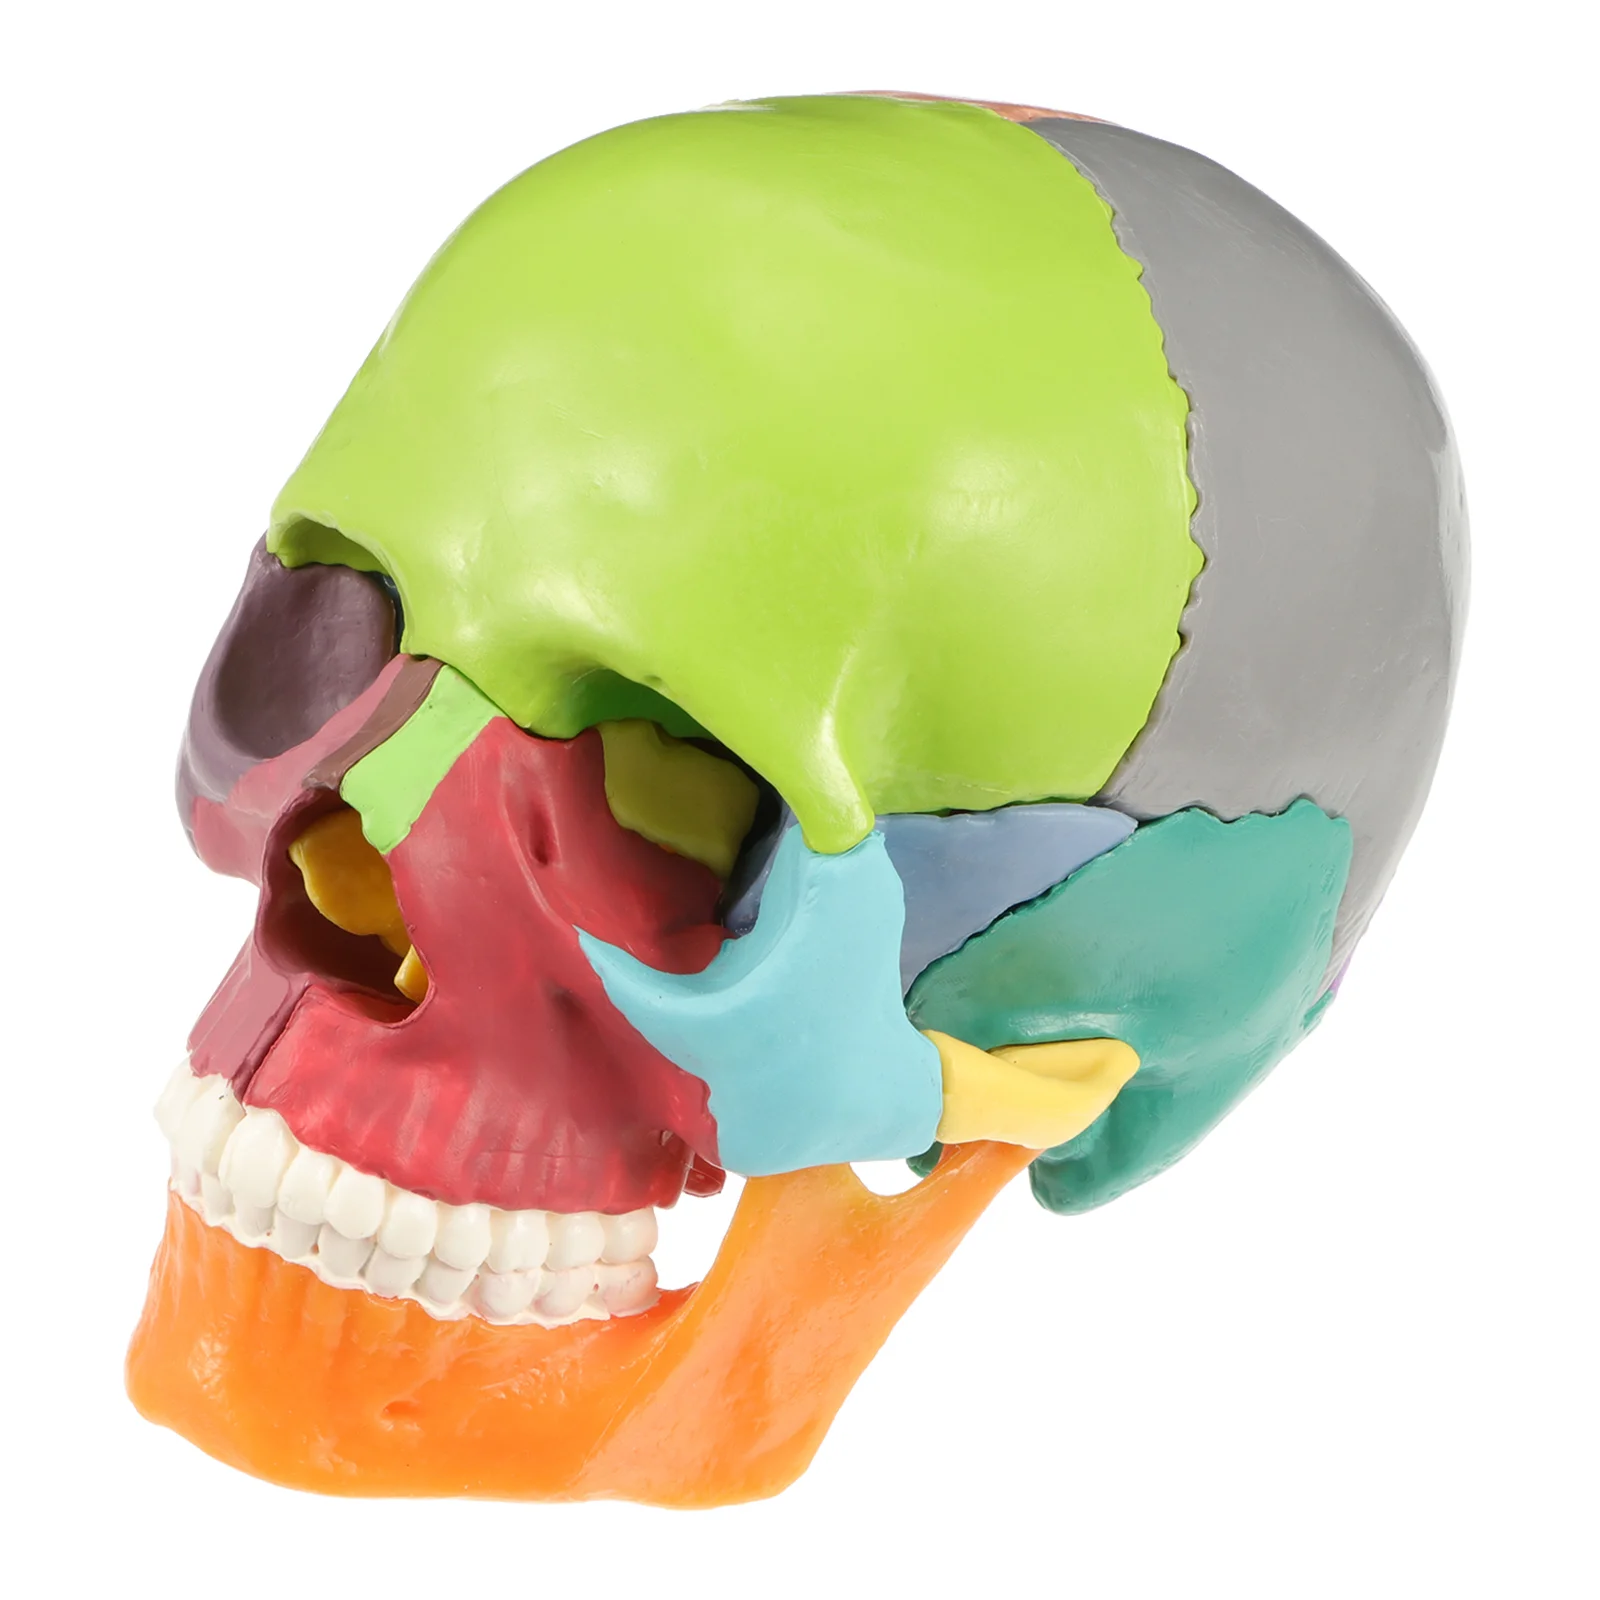 

Simulated Head Medical Model Anatomical Desktop Ornament Topper Human Body Colored Pvc Colorful Decor